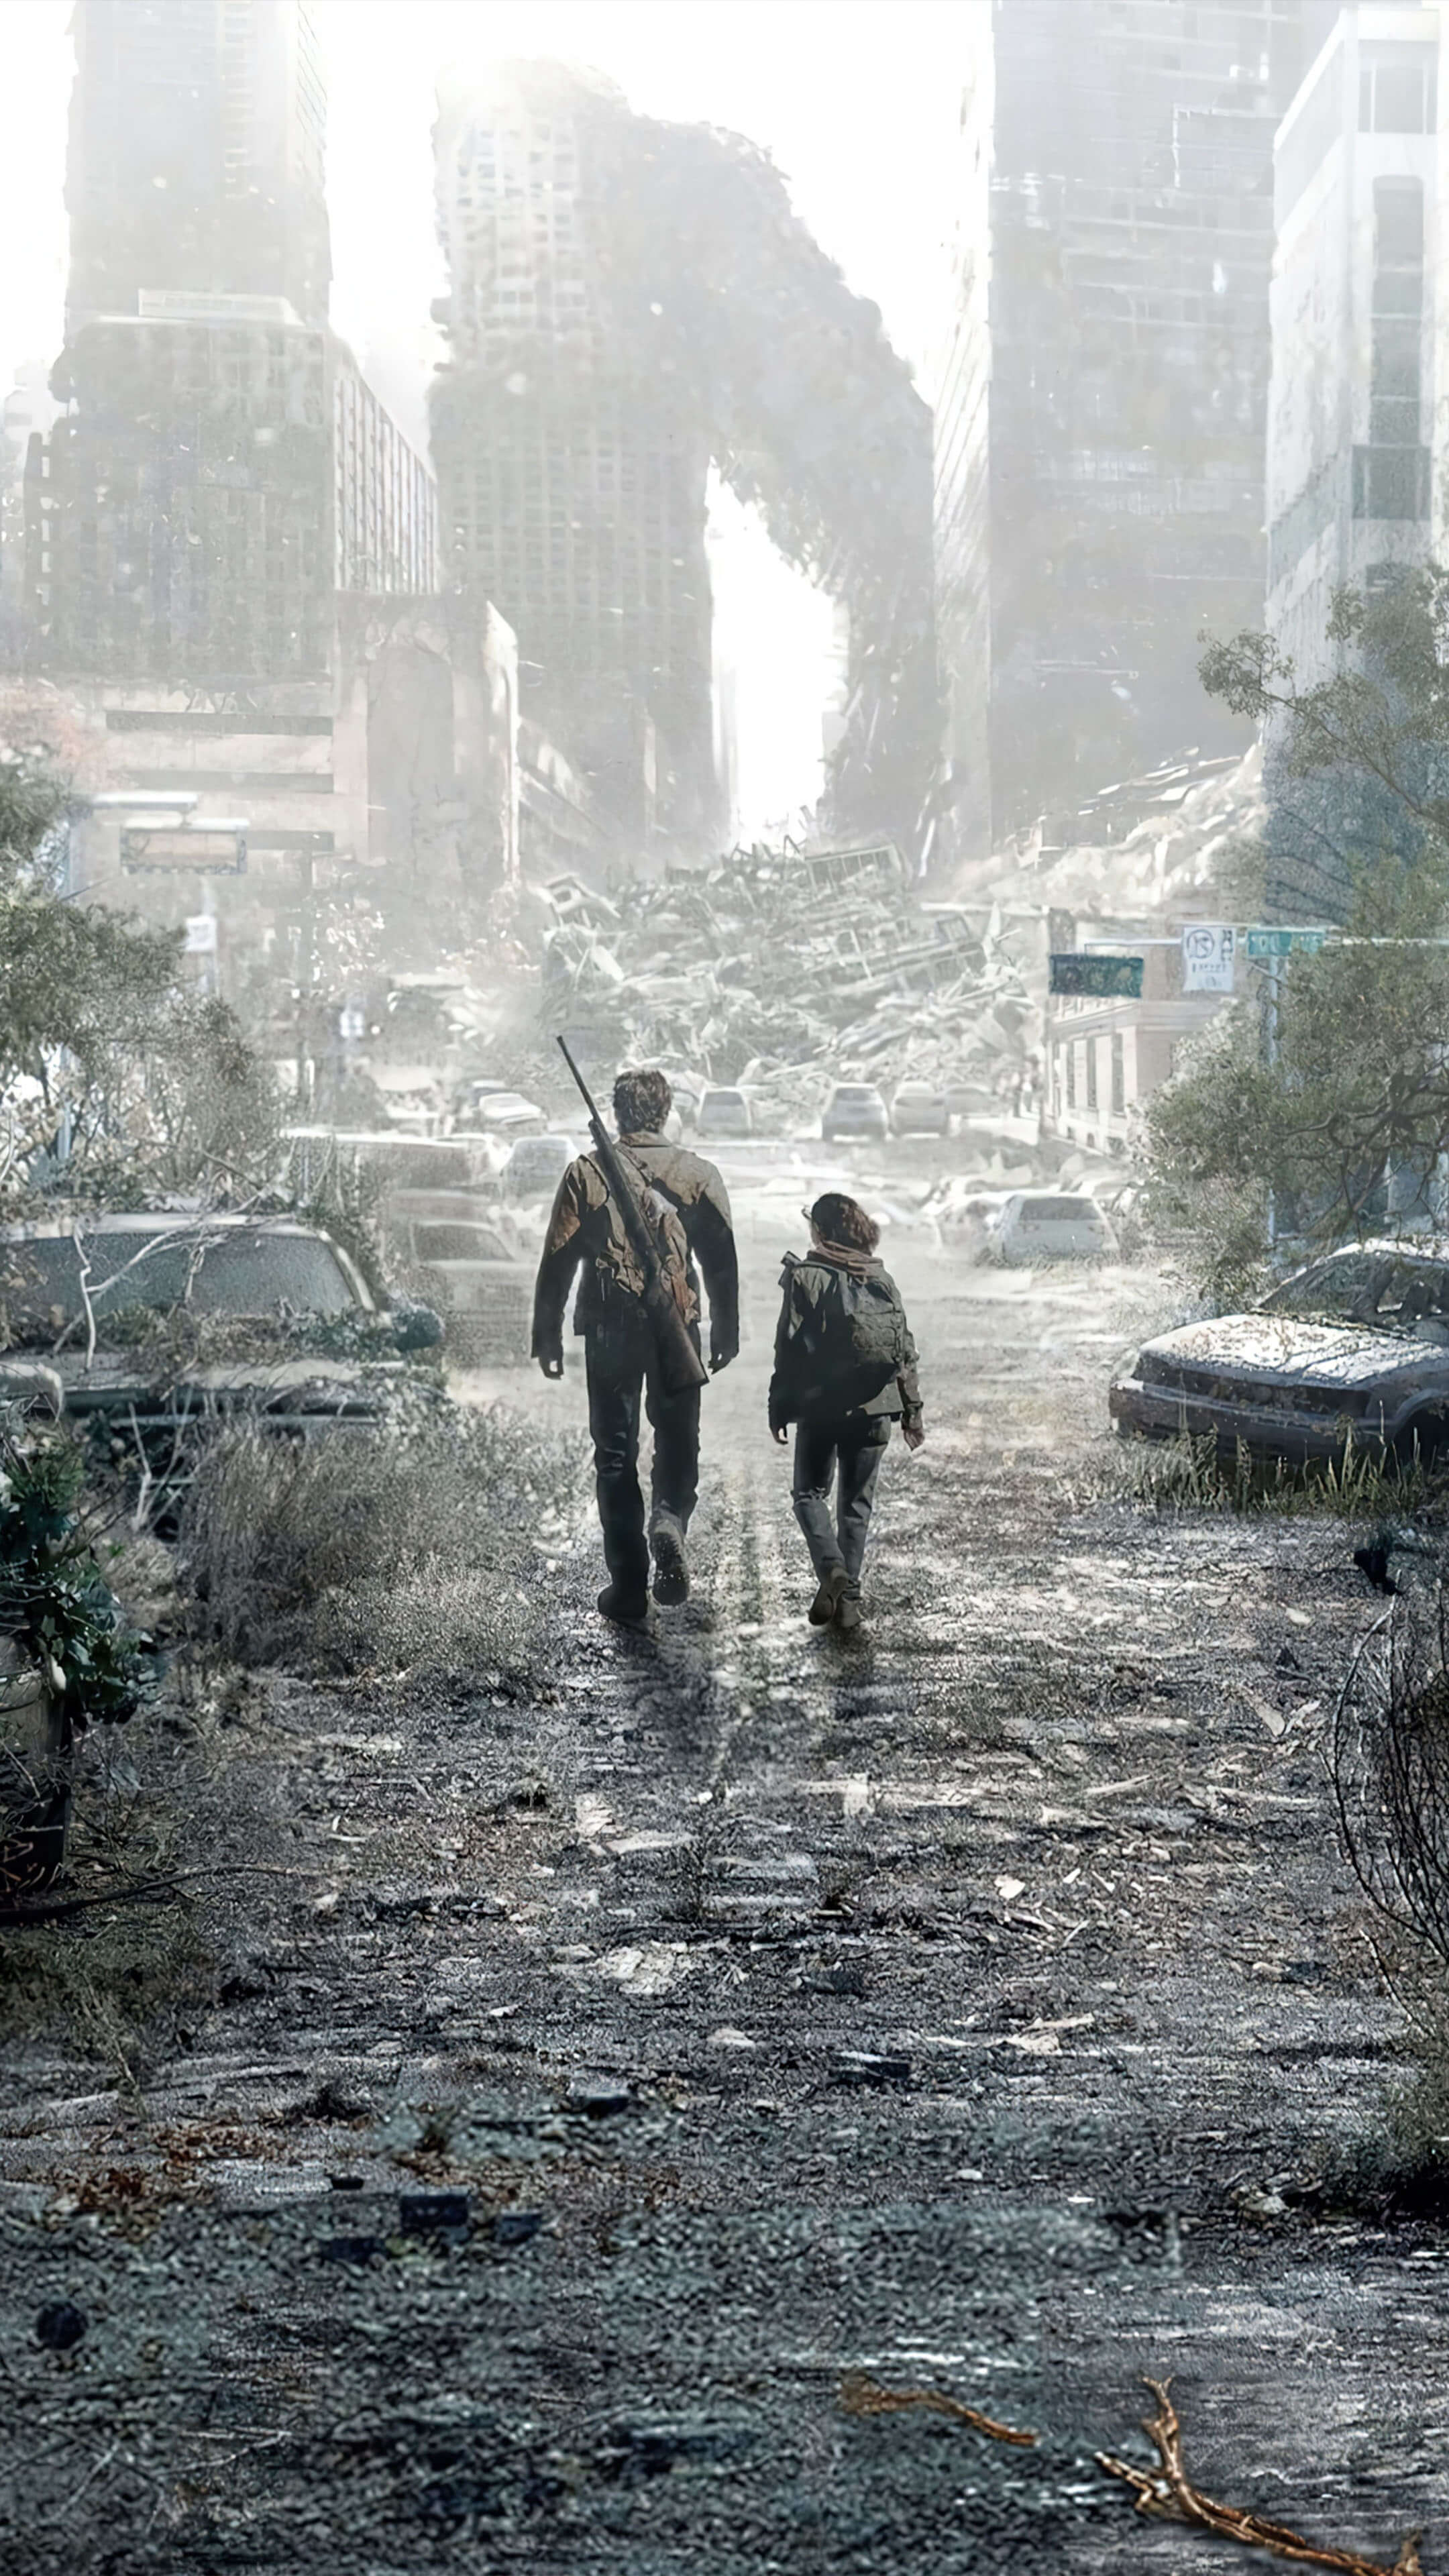 Surviving the Apocalypse: The Last of Us HBO Phone Wallpaper